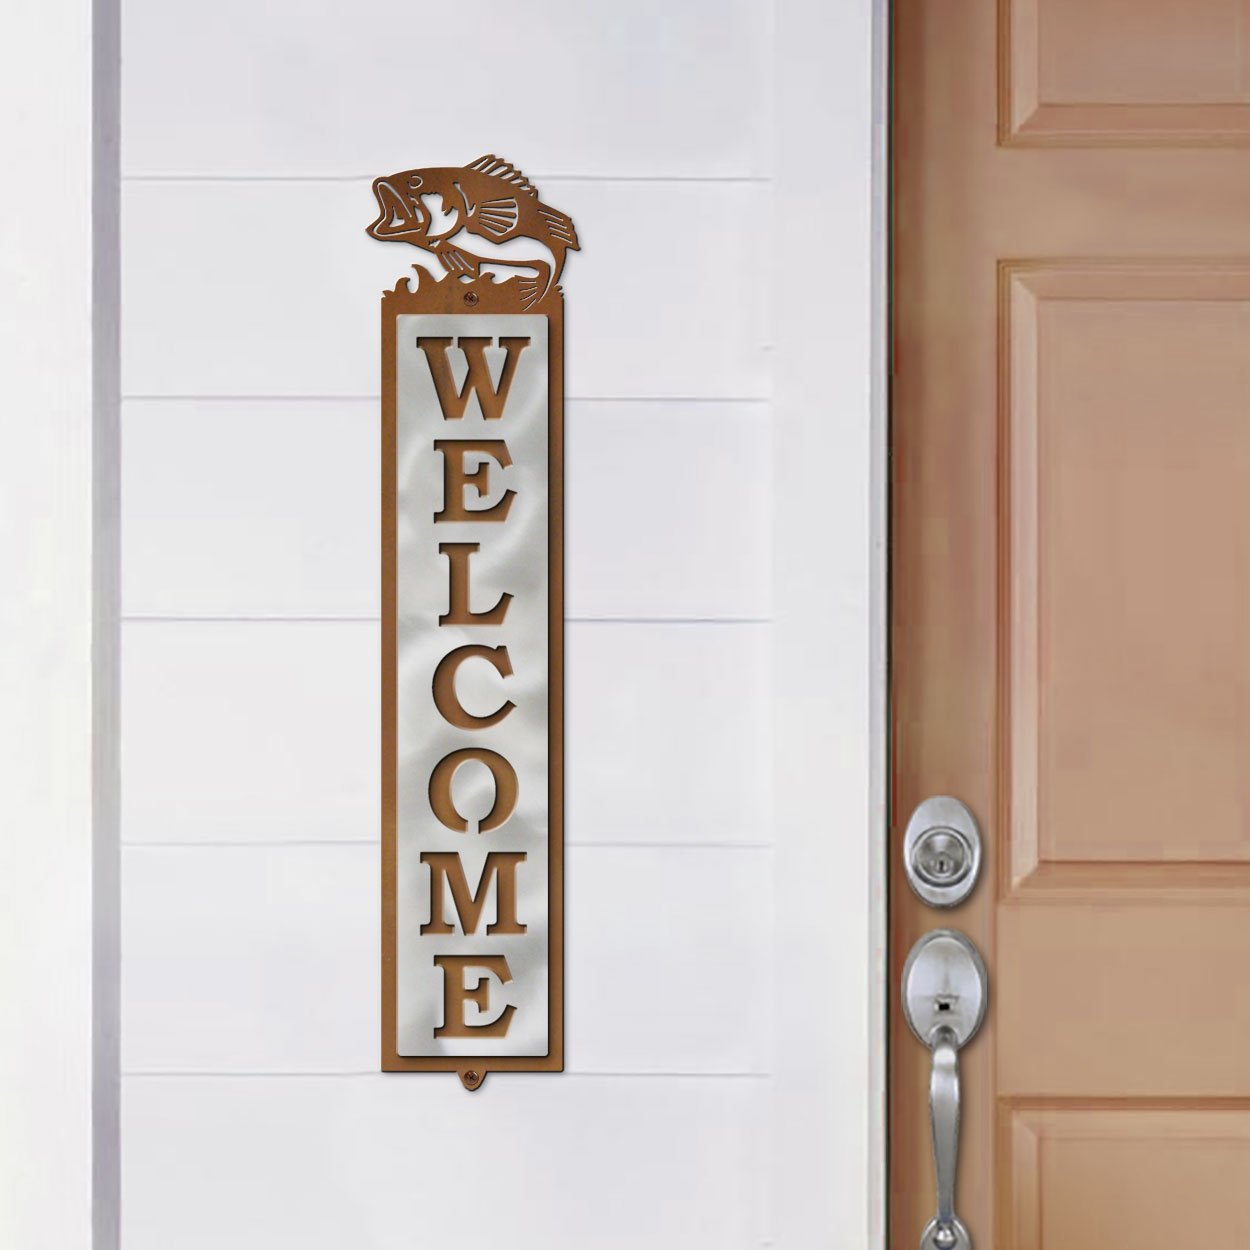 605008 - Bass Design Polished Steel on Rust Welcome Sign